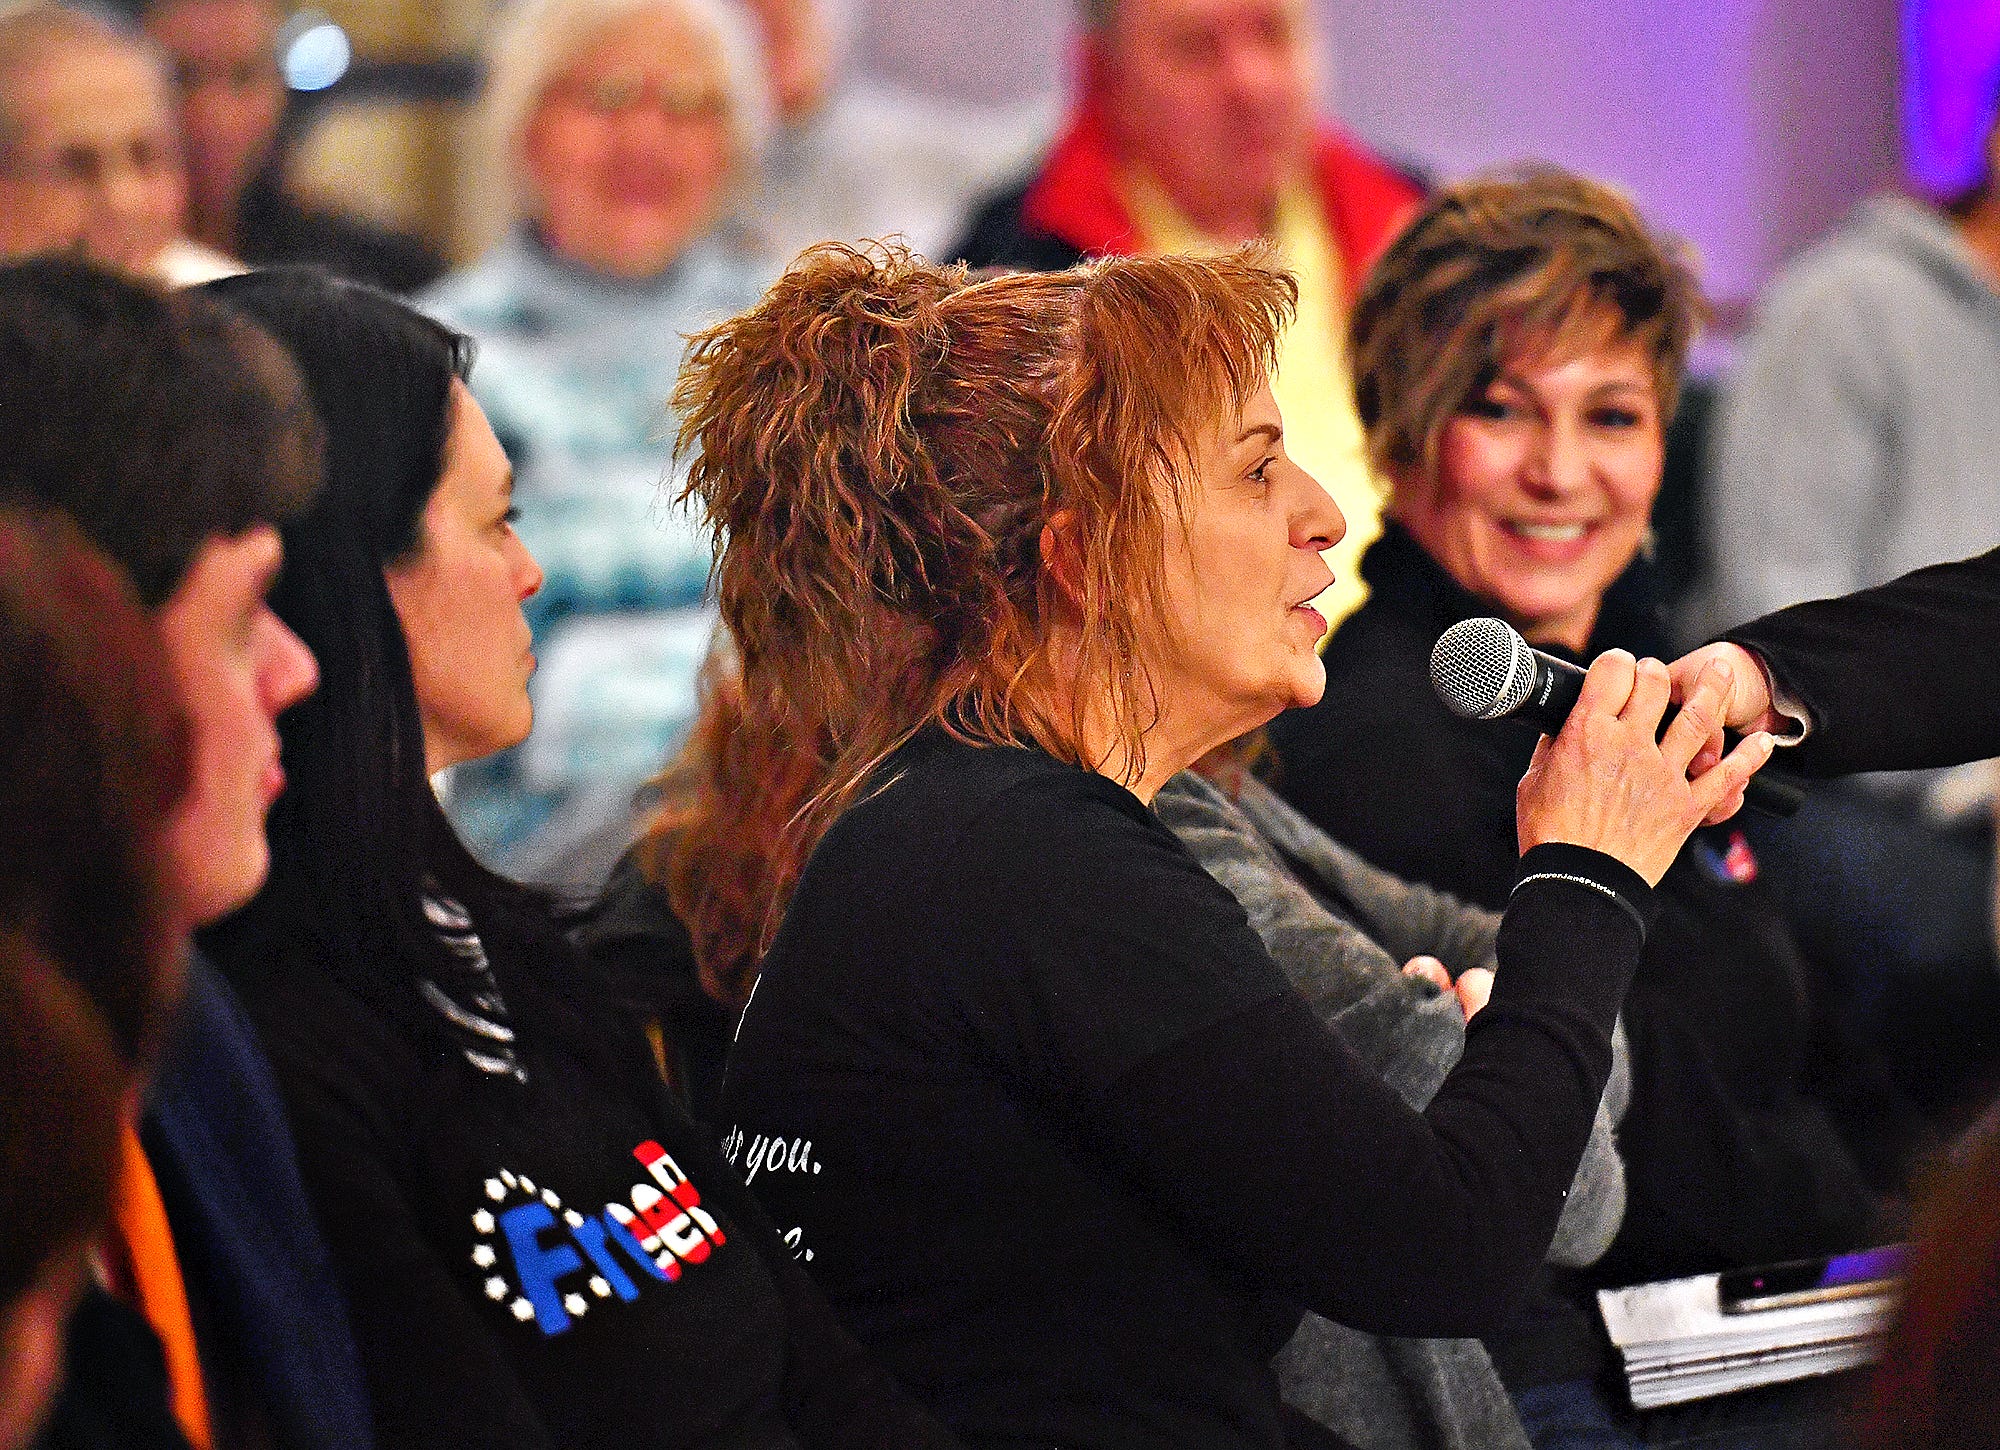 A member of Free PA asks Dr. Mehmet Oz about his religious beliefs during the audience commentary portion of the Doctor Oz for Senate event held at Wisehaven Event Center in Windsor Township, Saturday, Feb. 5, 2022. Dawn J. Sagert photo